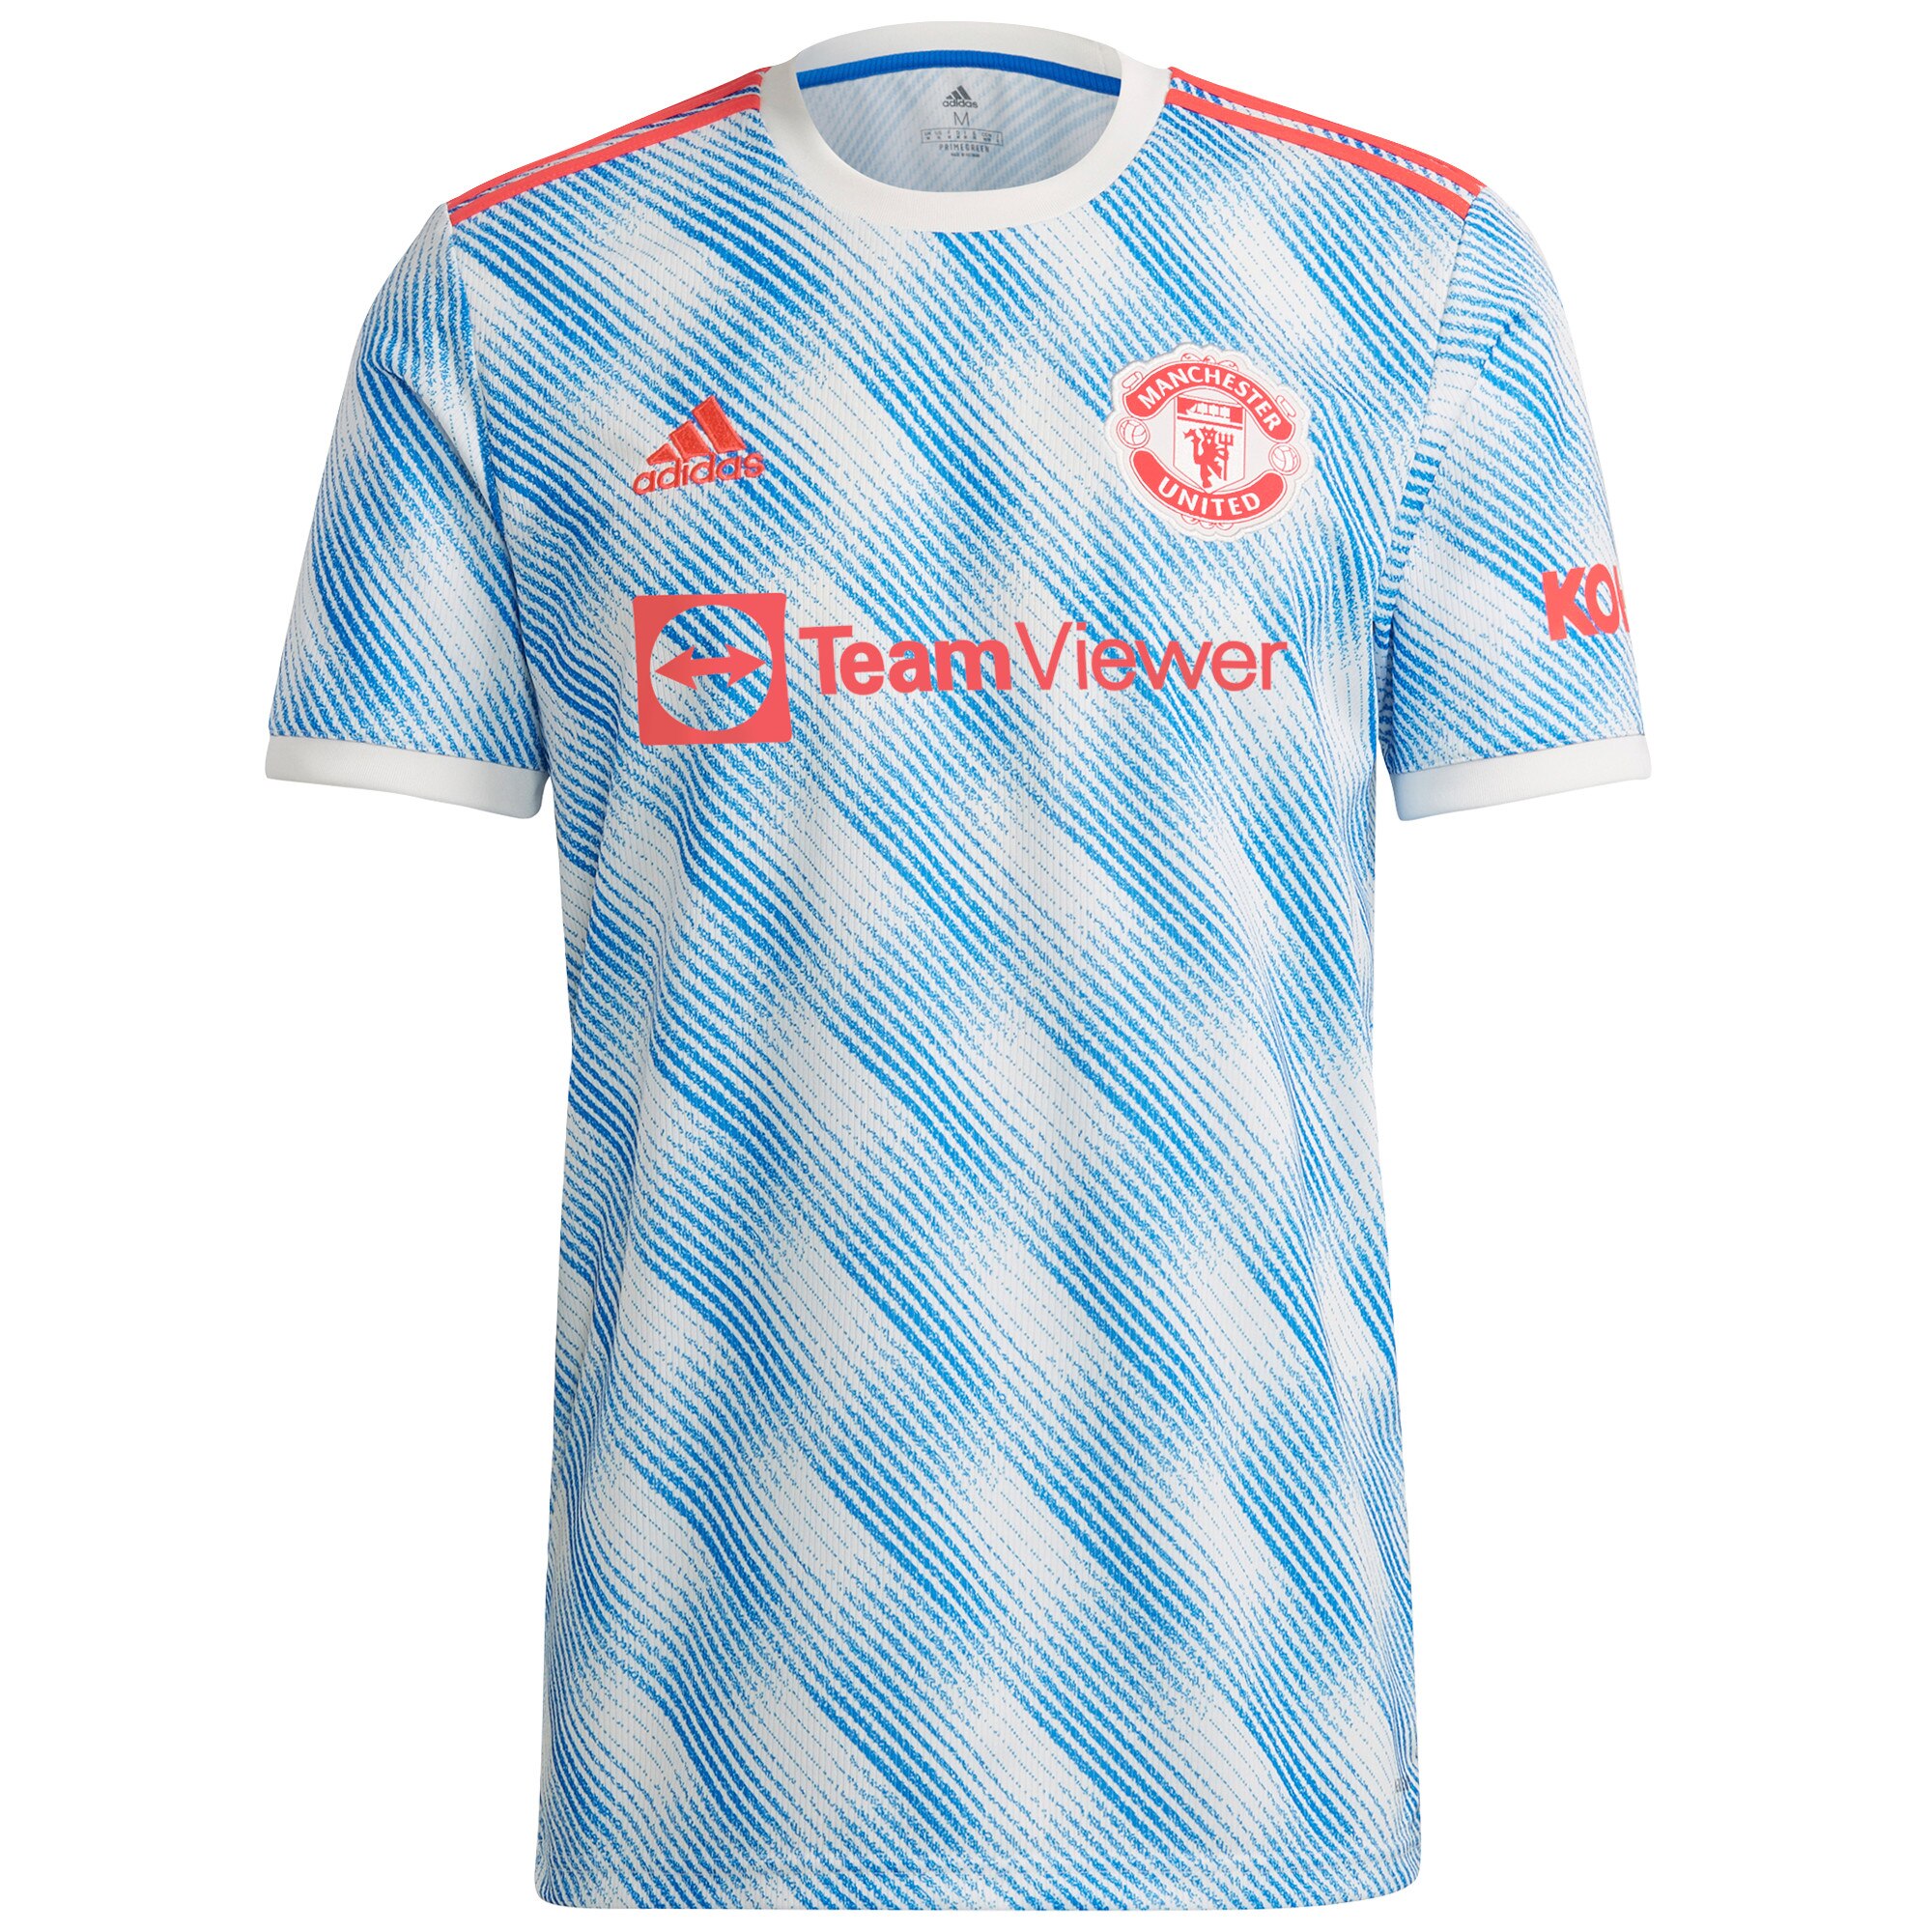 Manchester United Away Shirt 2021-22 with Matic 31 printing